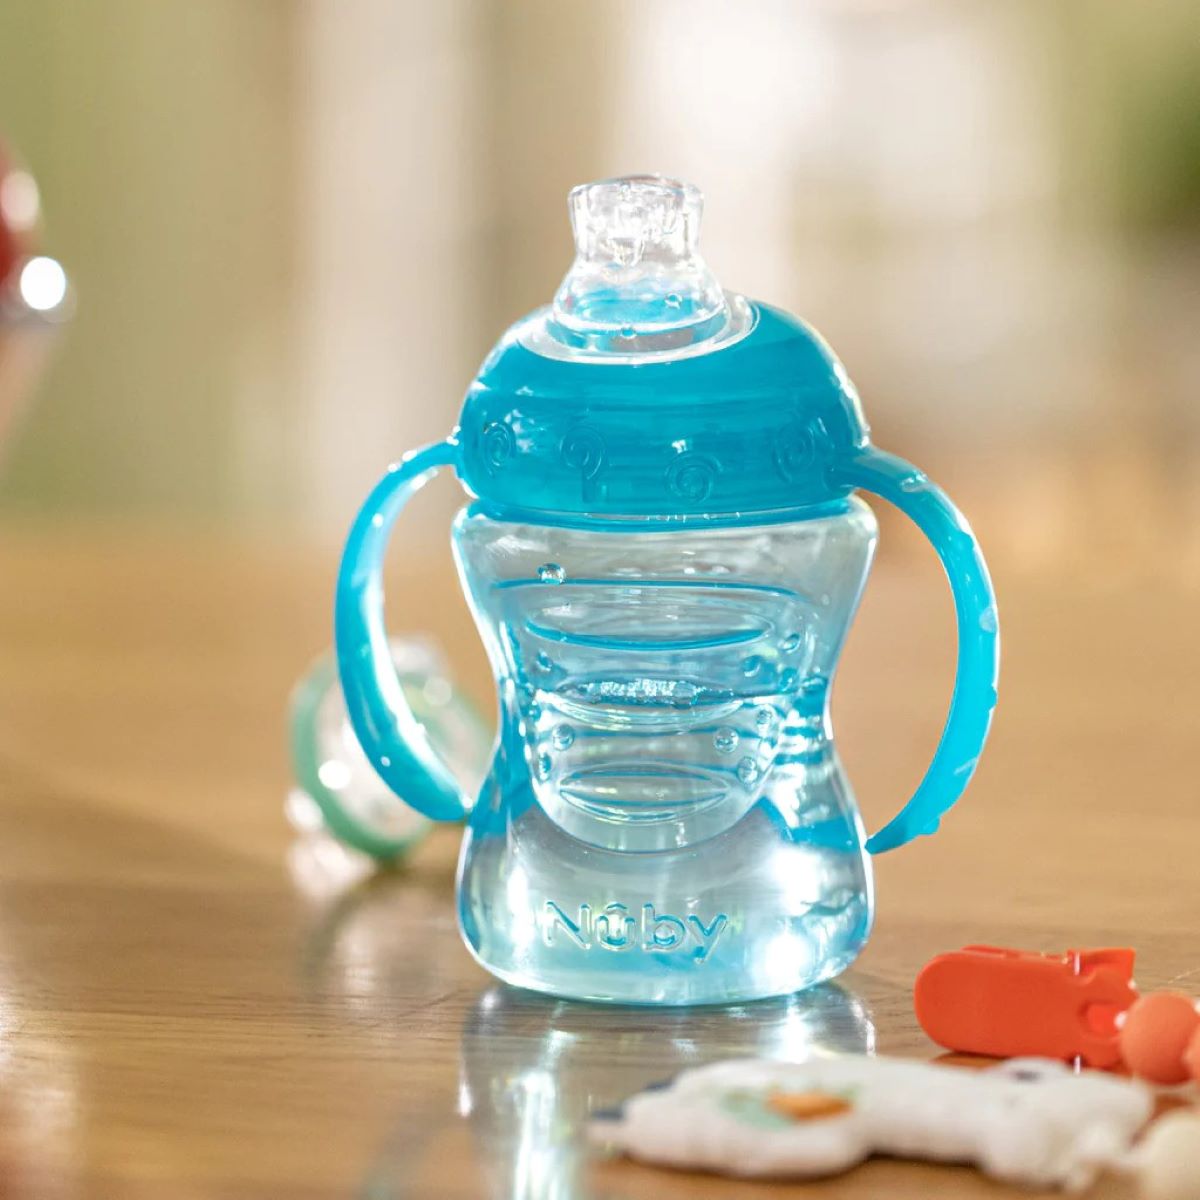 How To Use A Nuby Sippy Cup